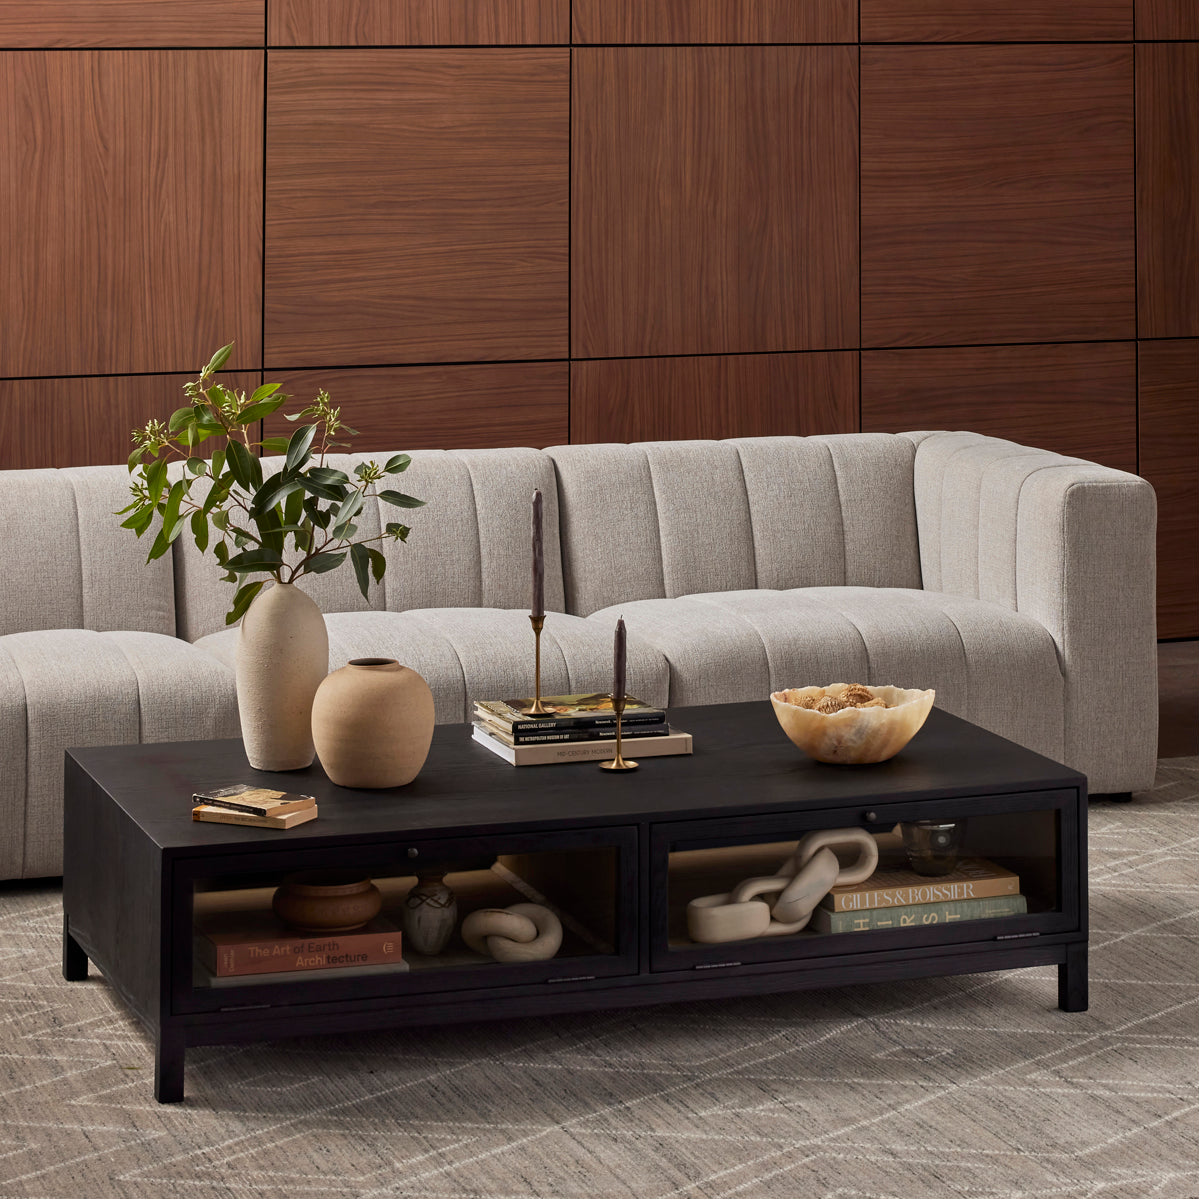 Four Hands Irondale Millie Coffee Table - Drifted Matte Black